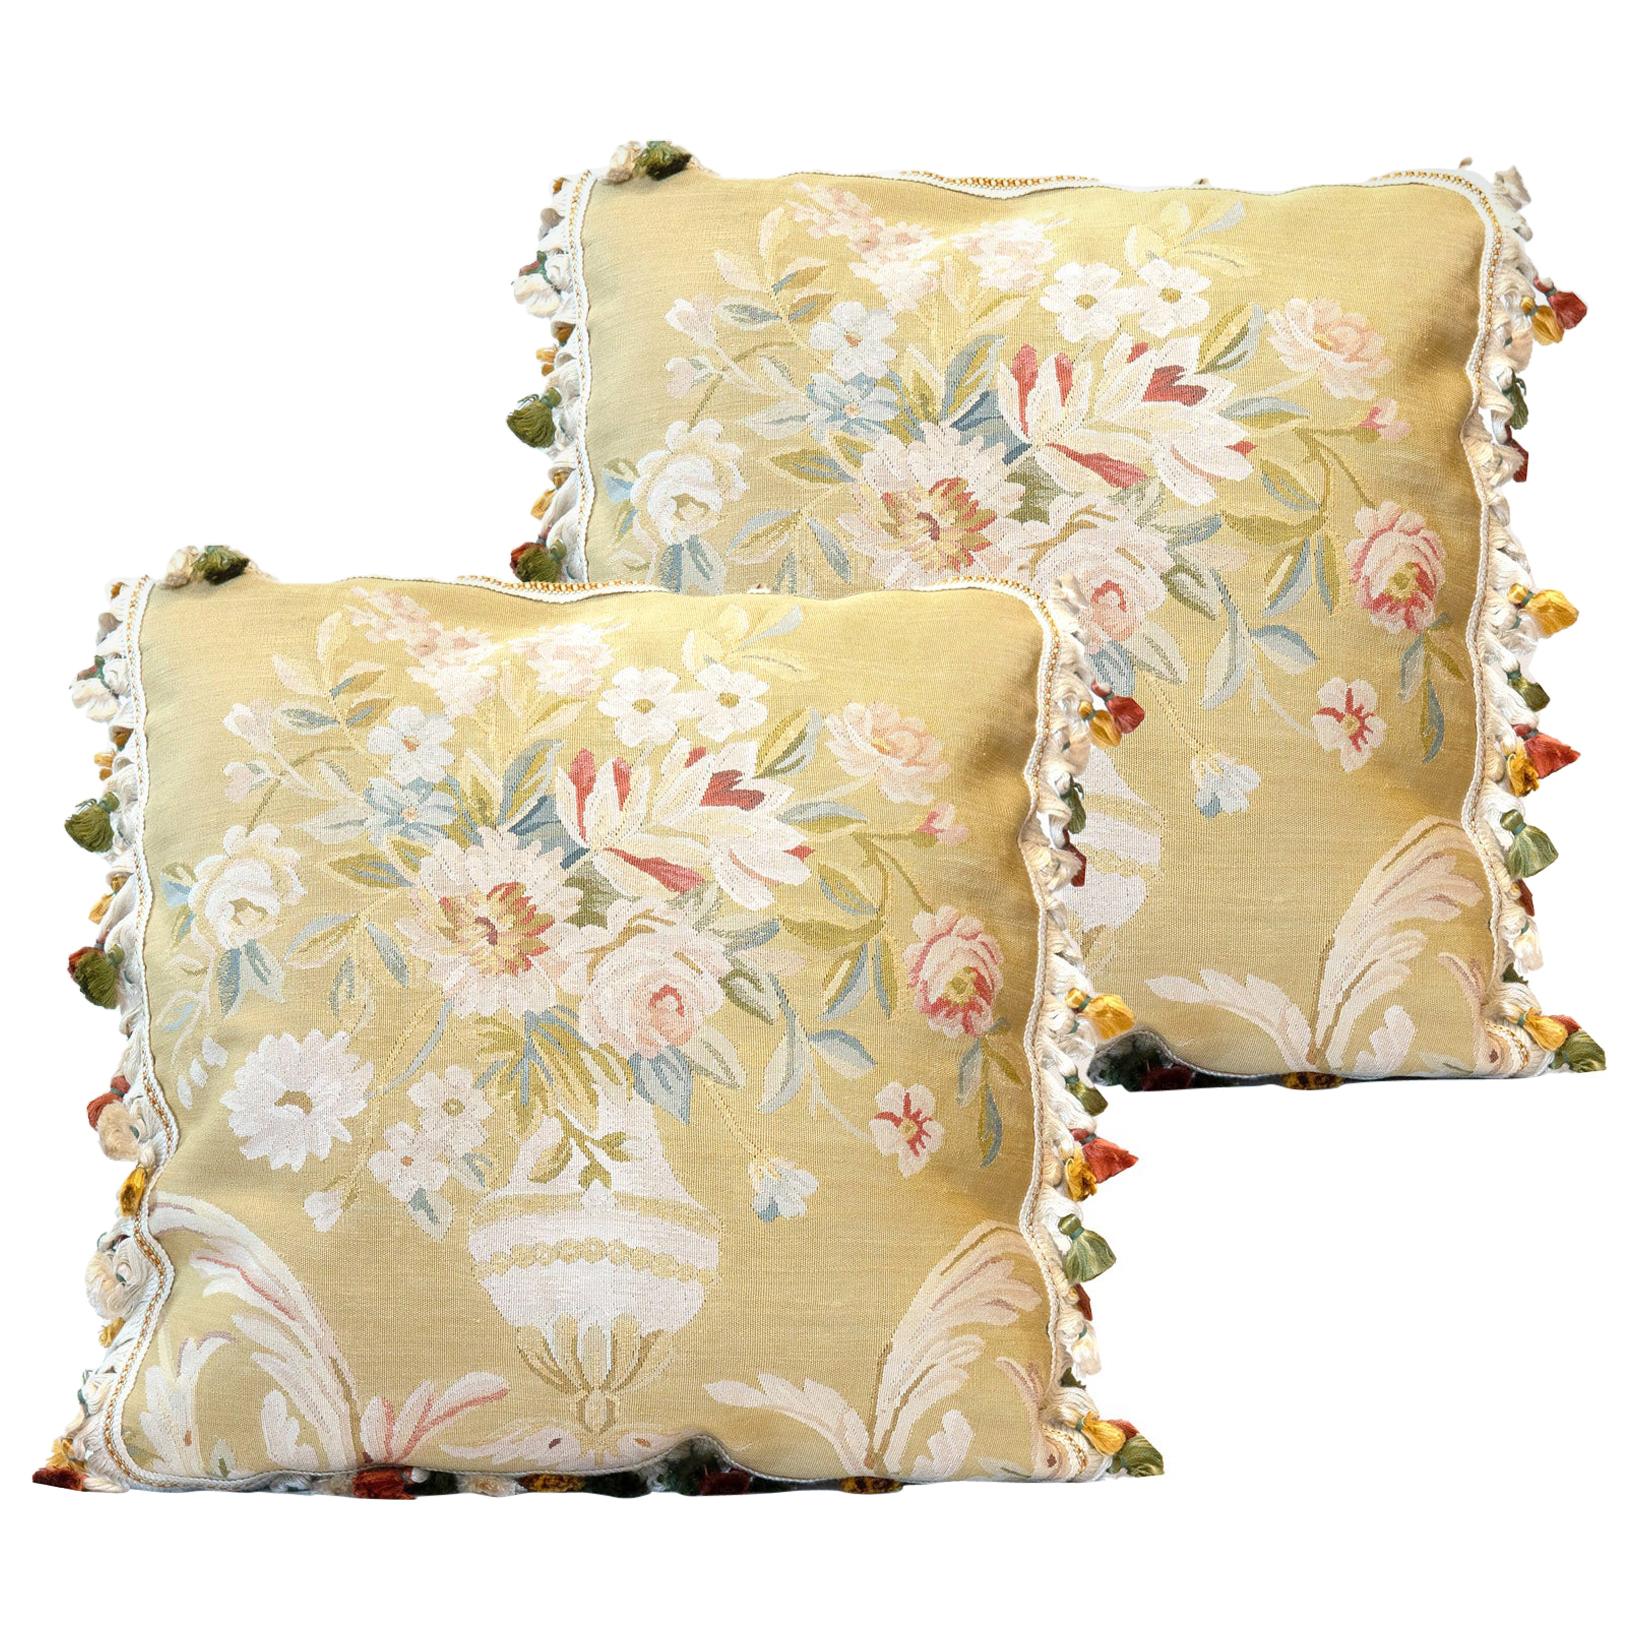 Vintage Pure Silk Cushion Covers Pair of Handmade Floral Aubusson Pillows Cases